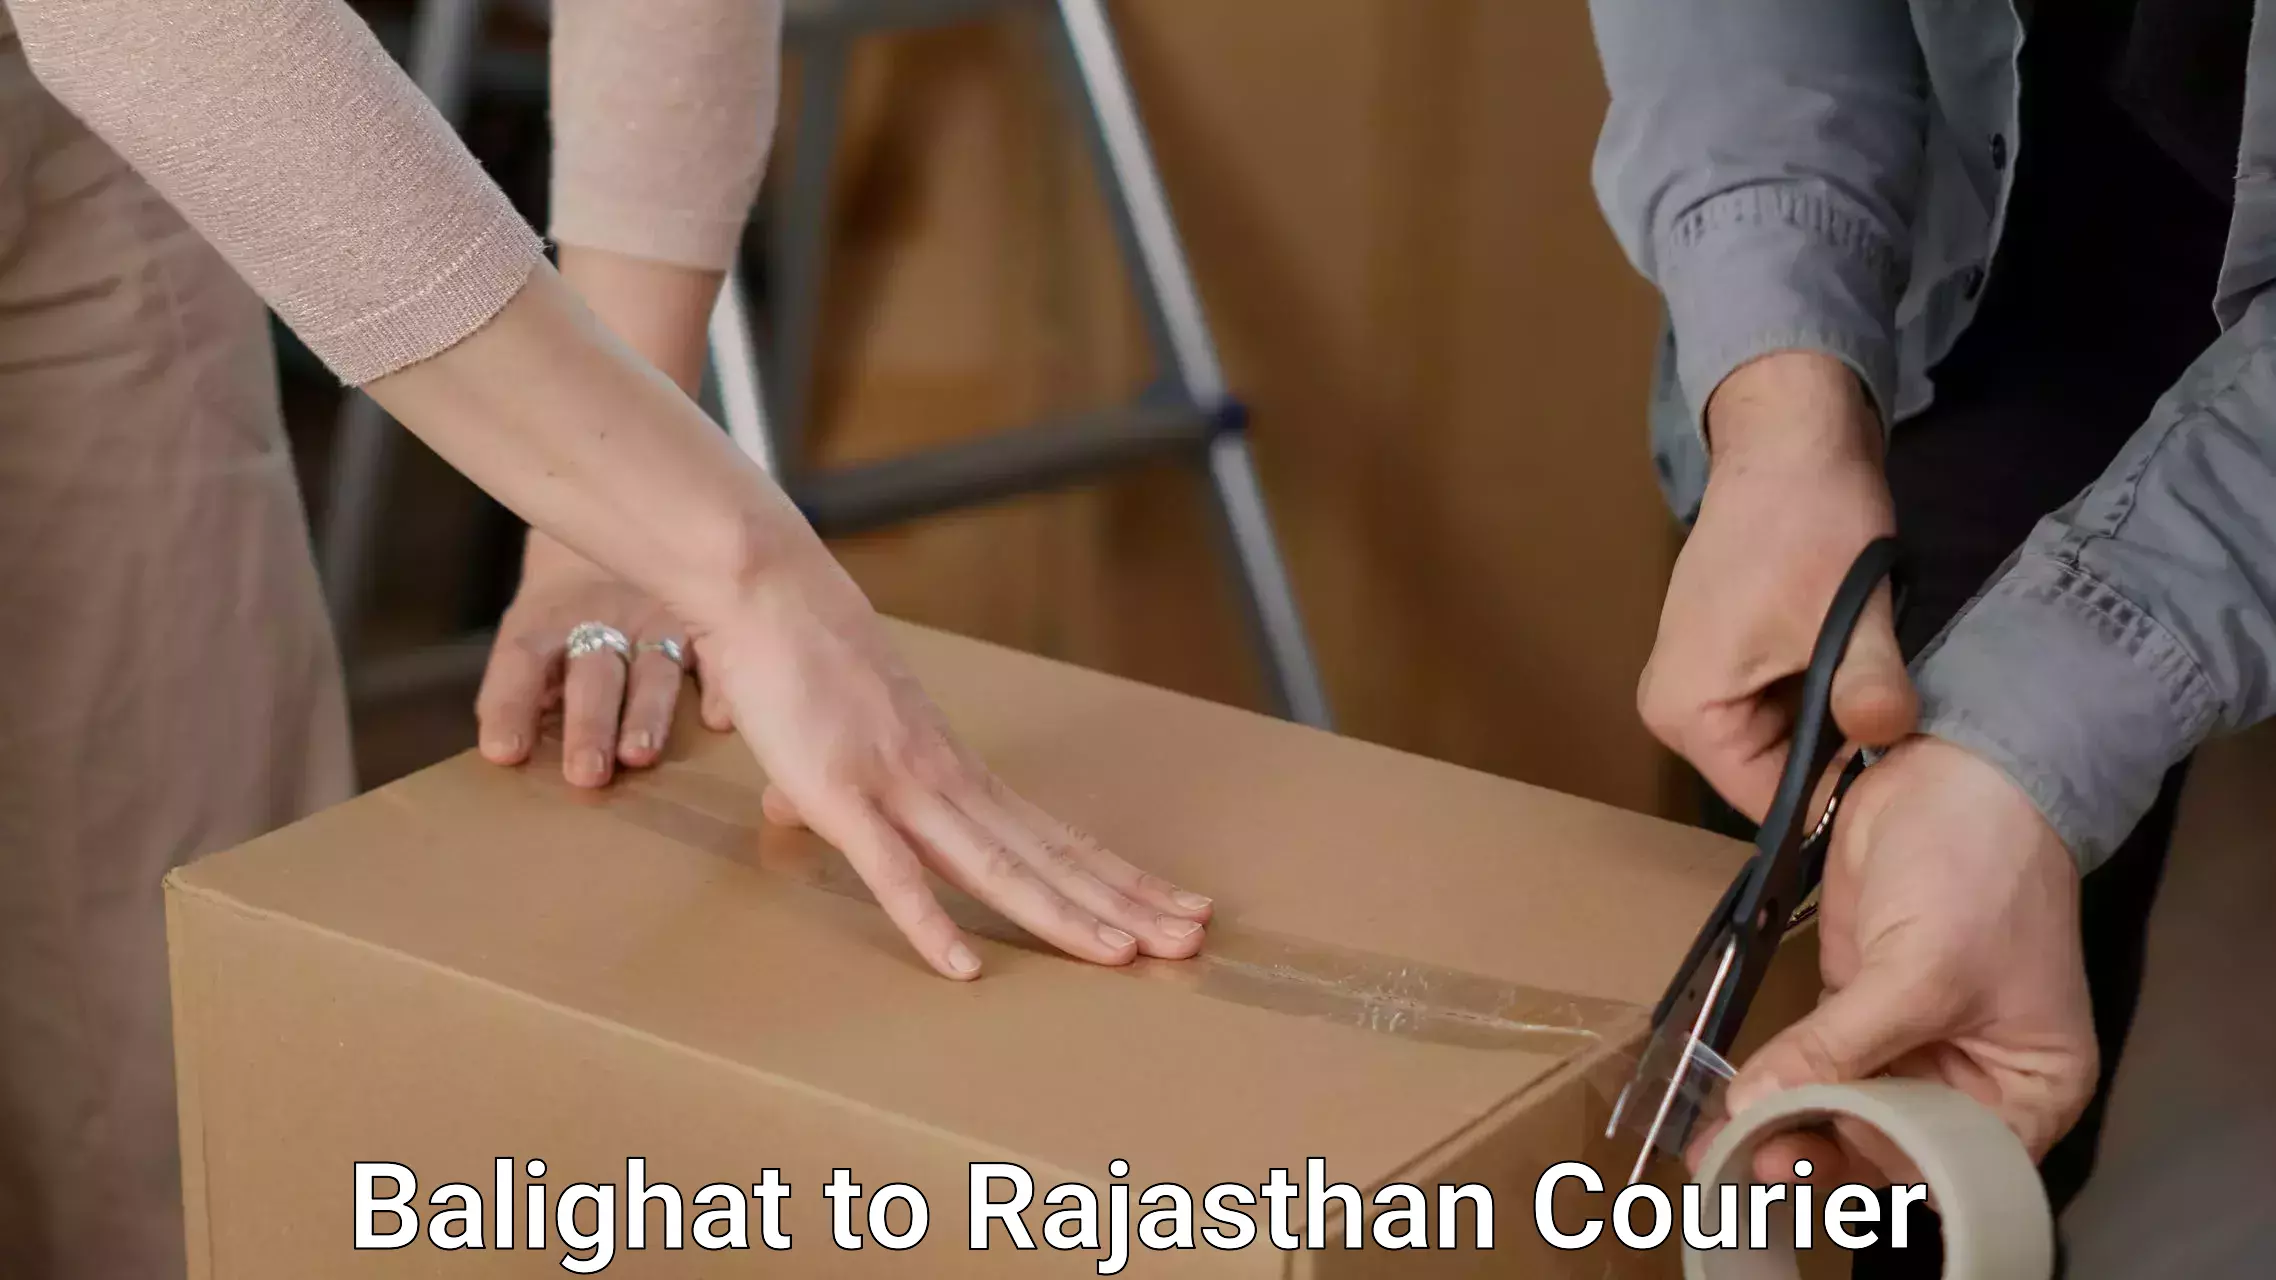 Furniture relocation experts Balighat to Piparcity